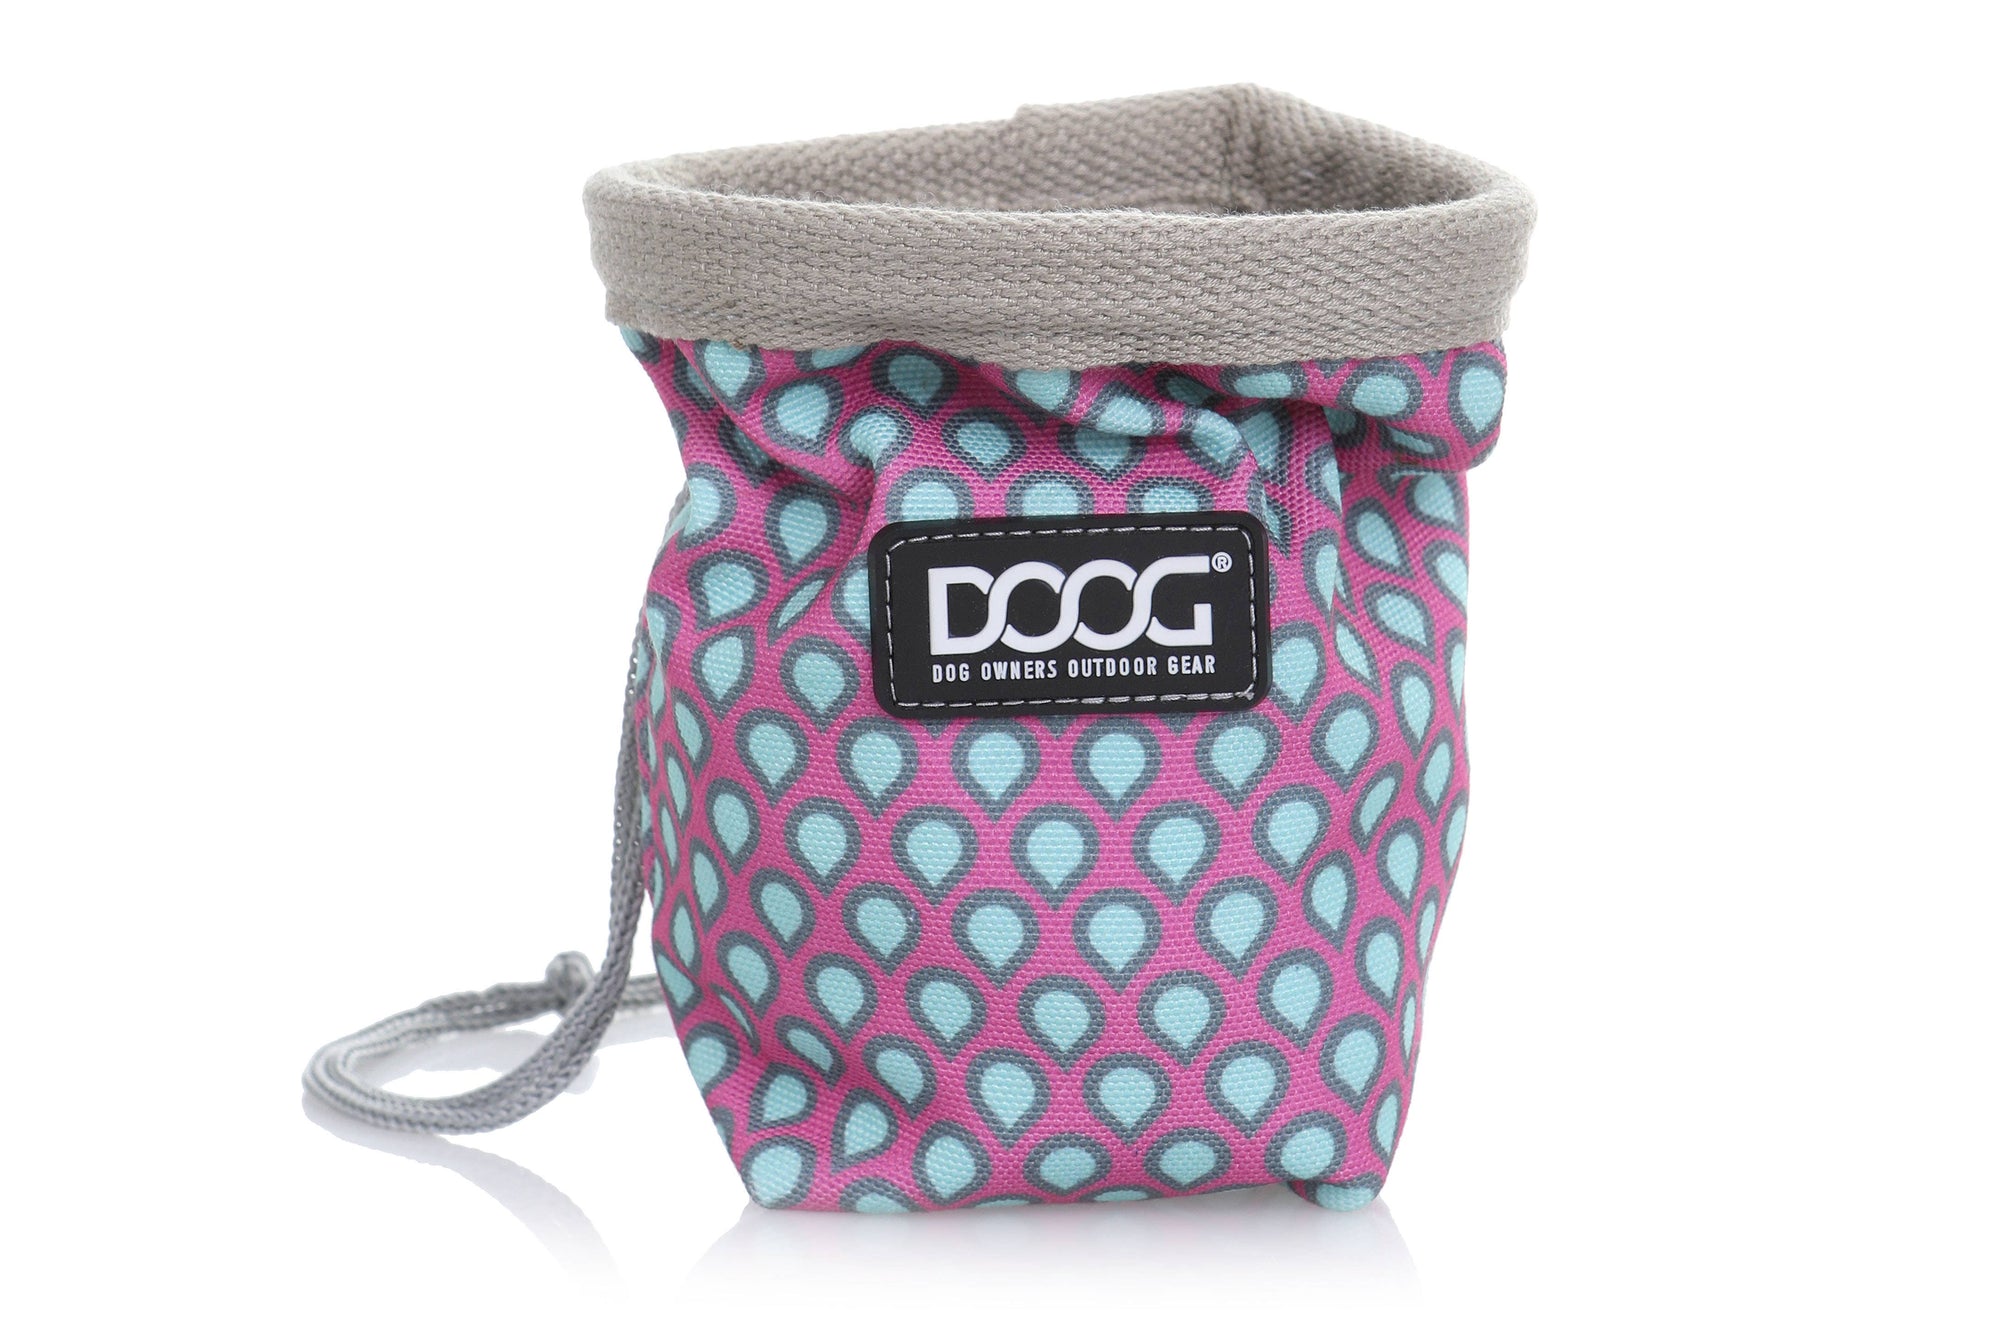 Dog Owners Outdoor Gear Dog Treat & Training Pouch (Small)